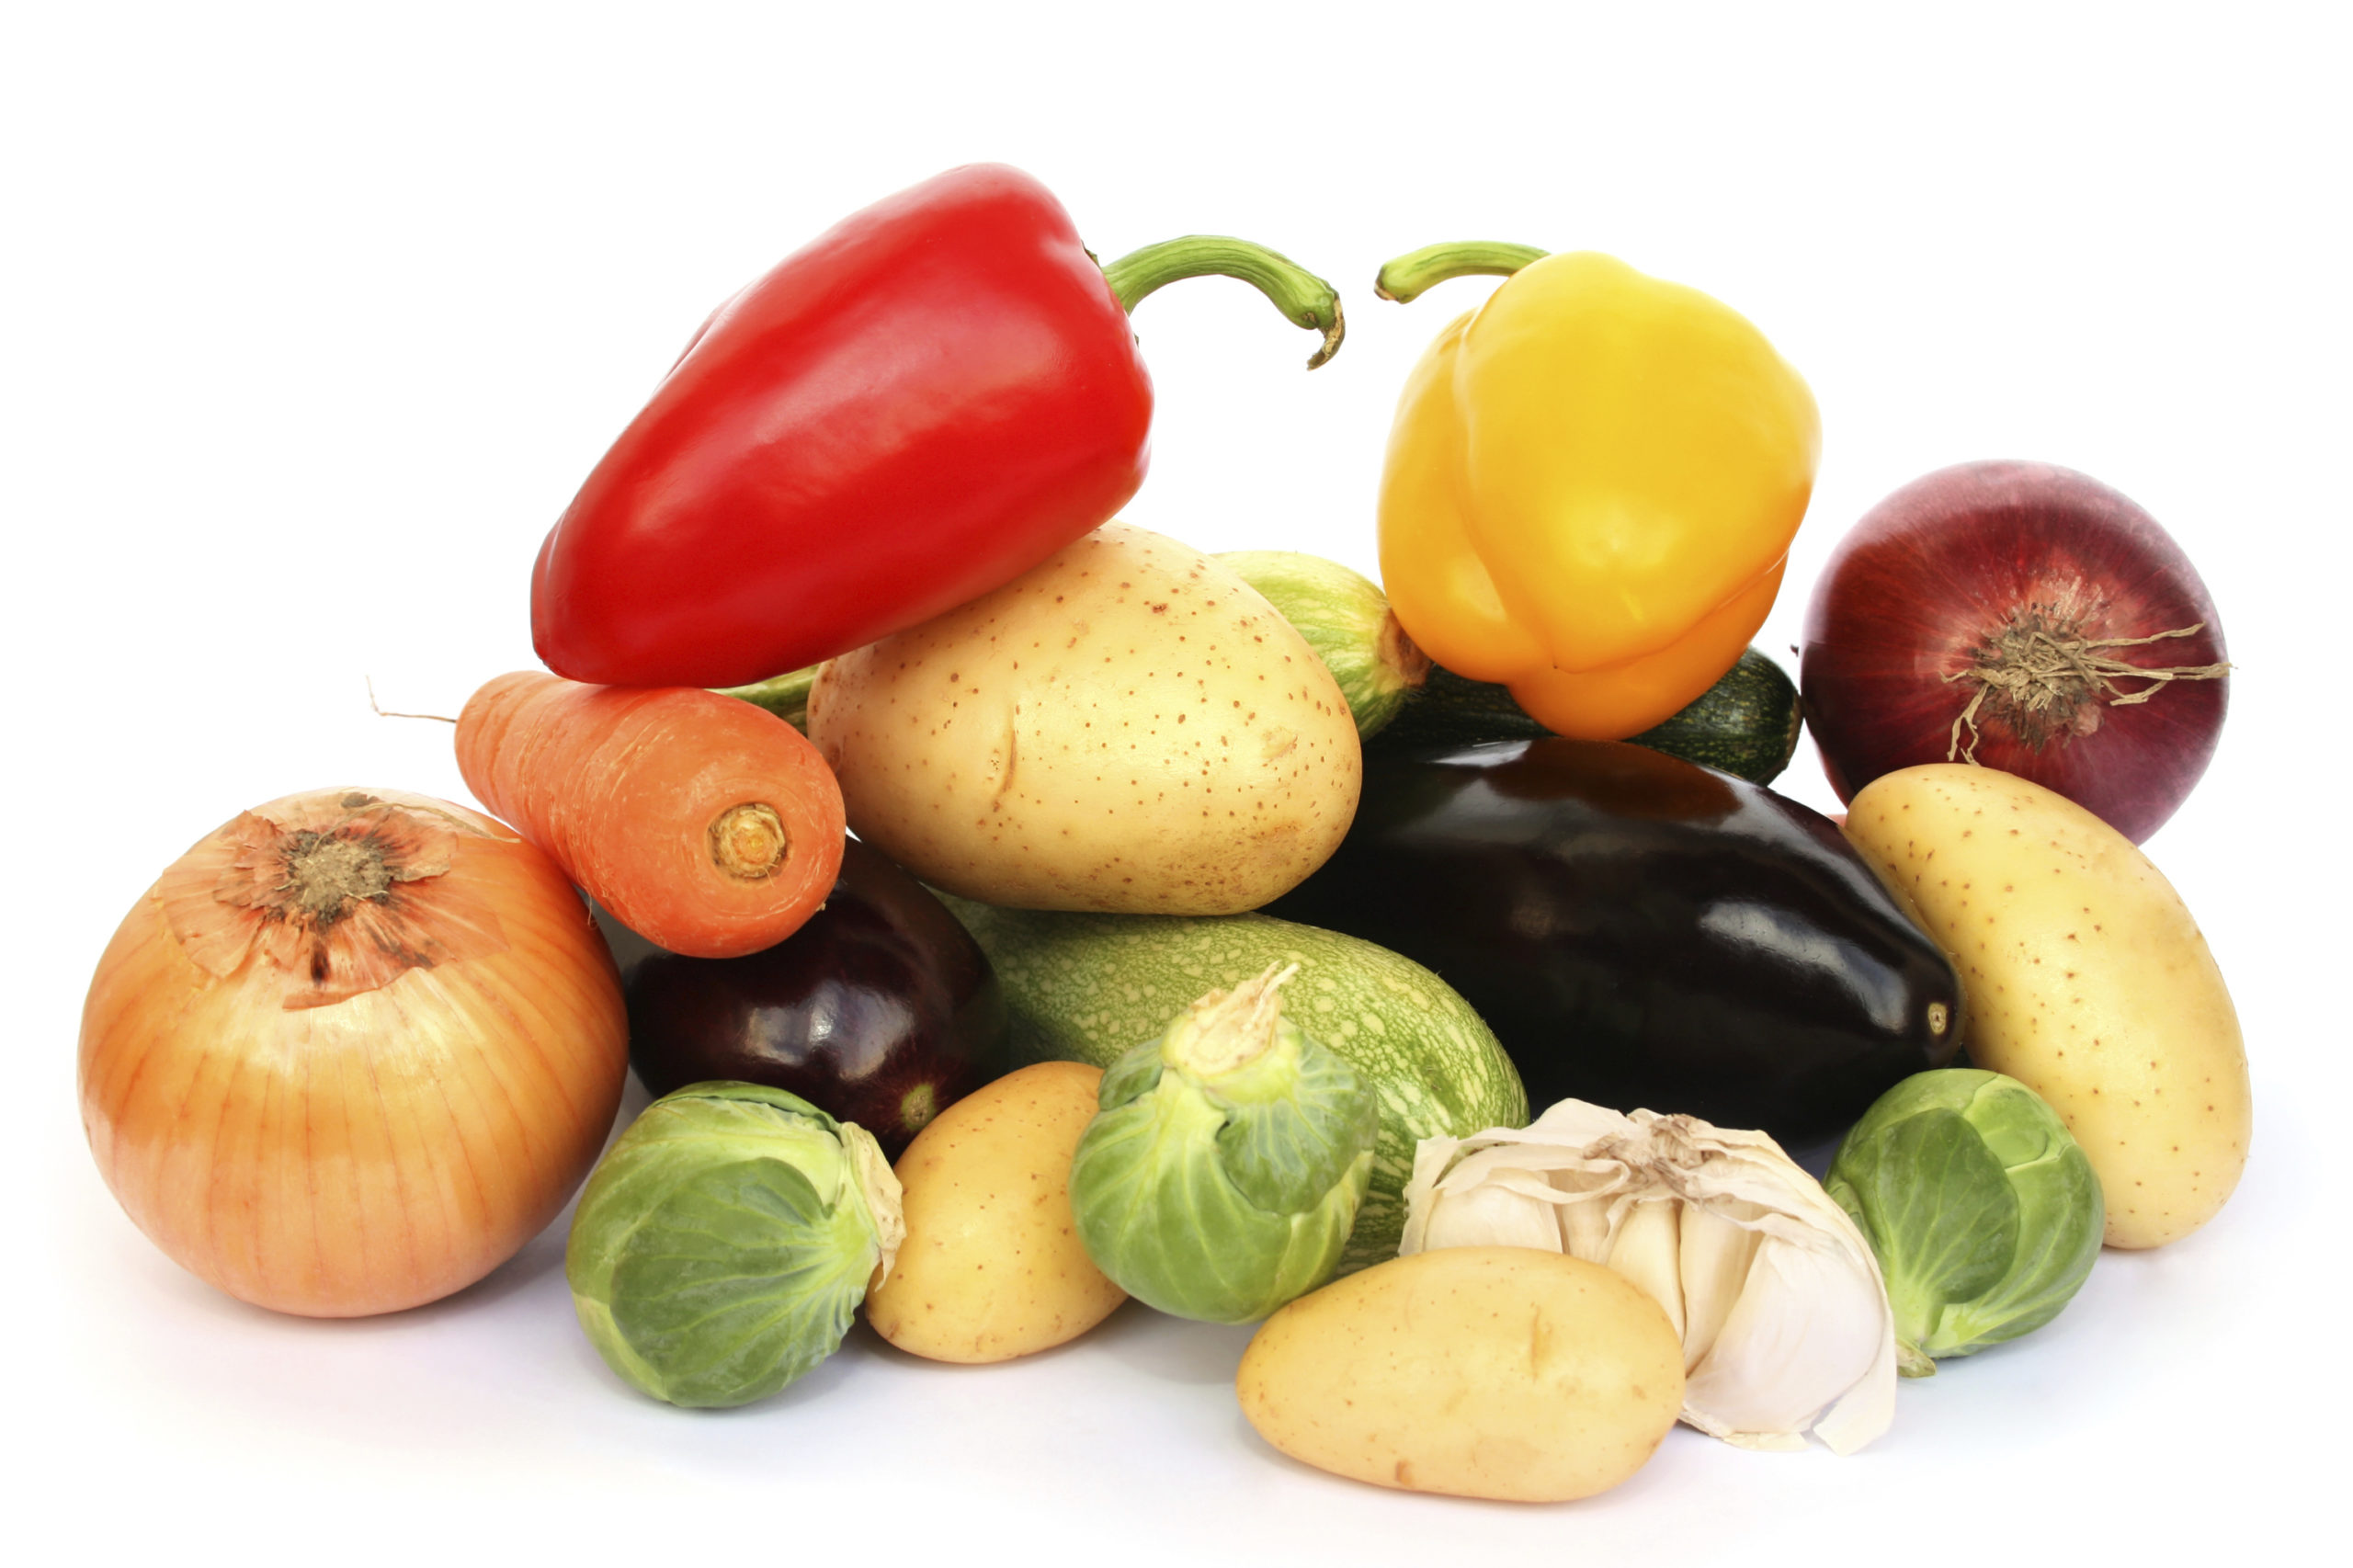 Image of colorful vegetables